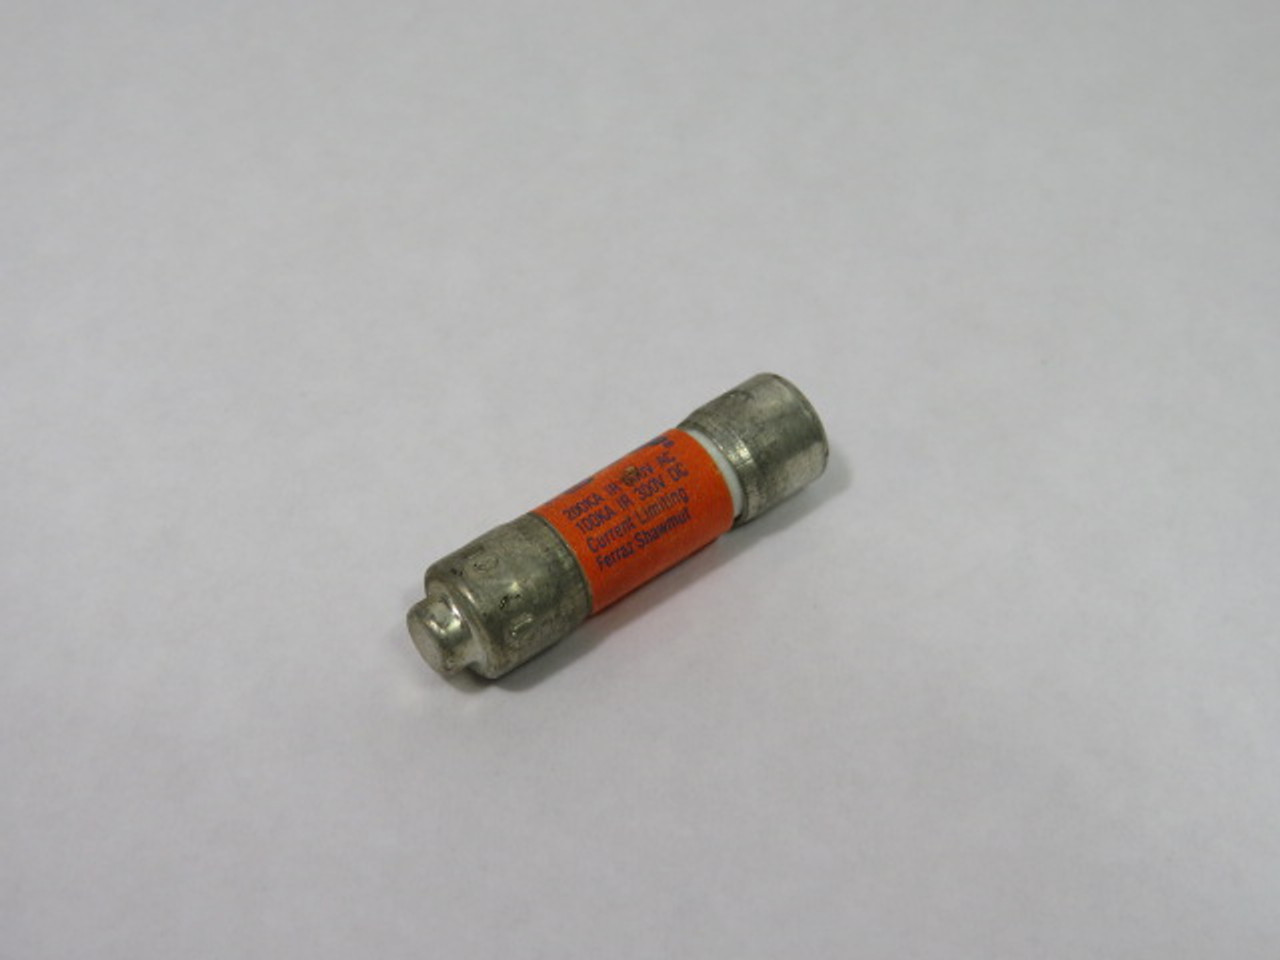 Amp-Trap ATDR20 Time Delay Fuse 20A 600V USED